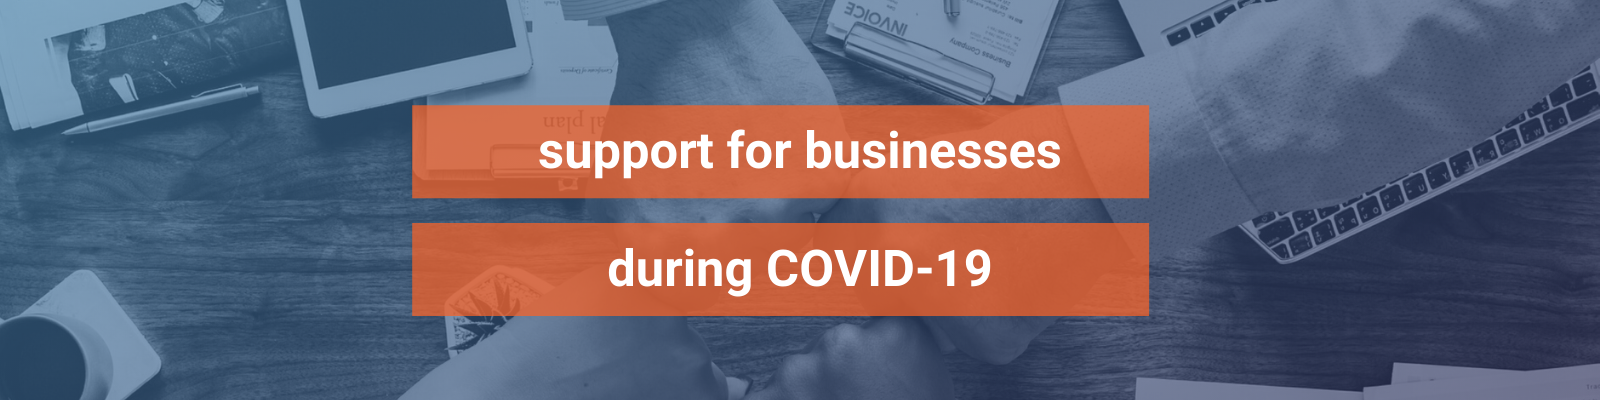 Support for businesses and their cash flow during Covid-19